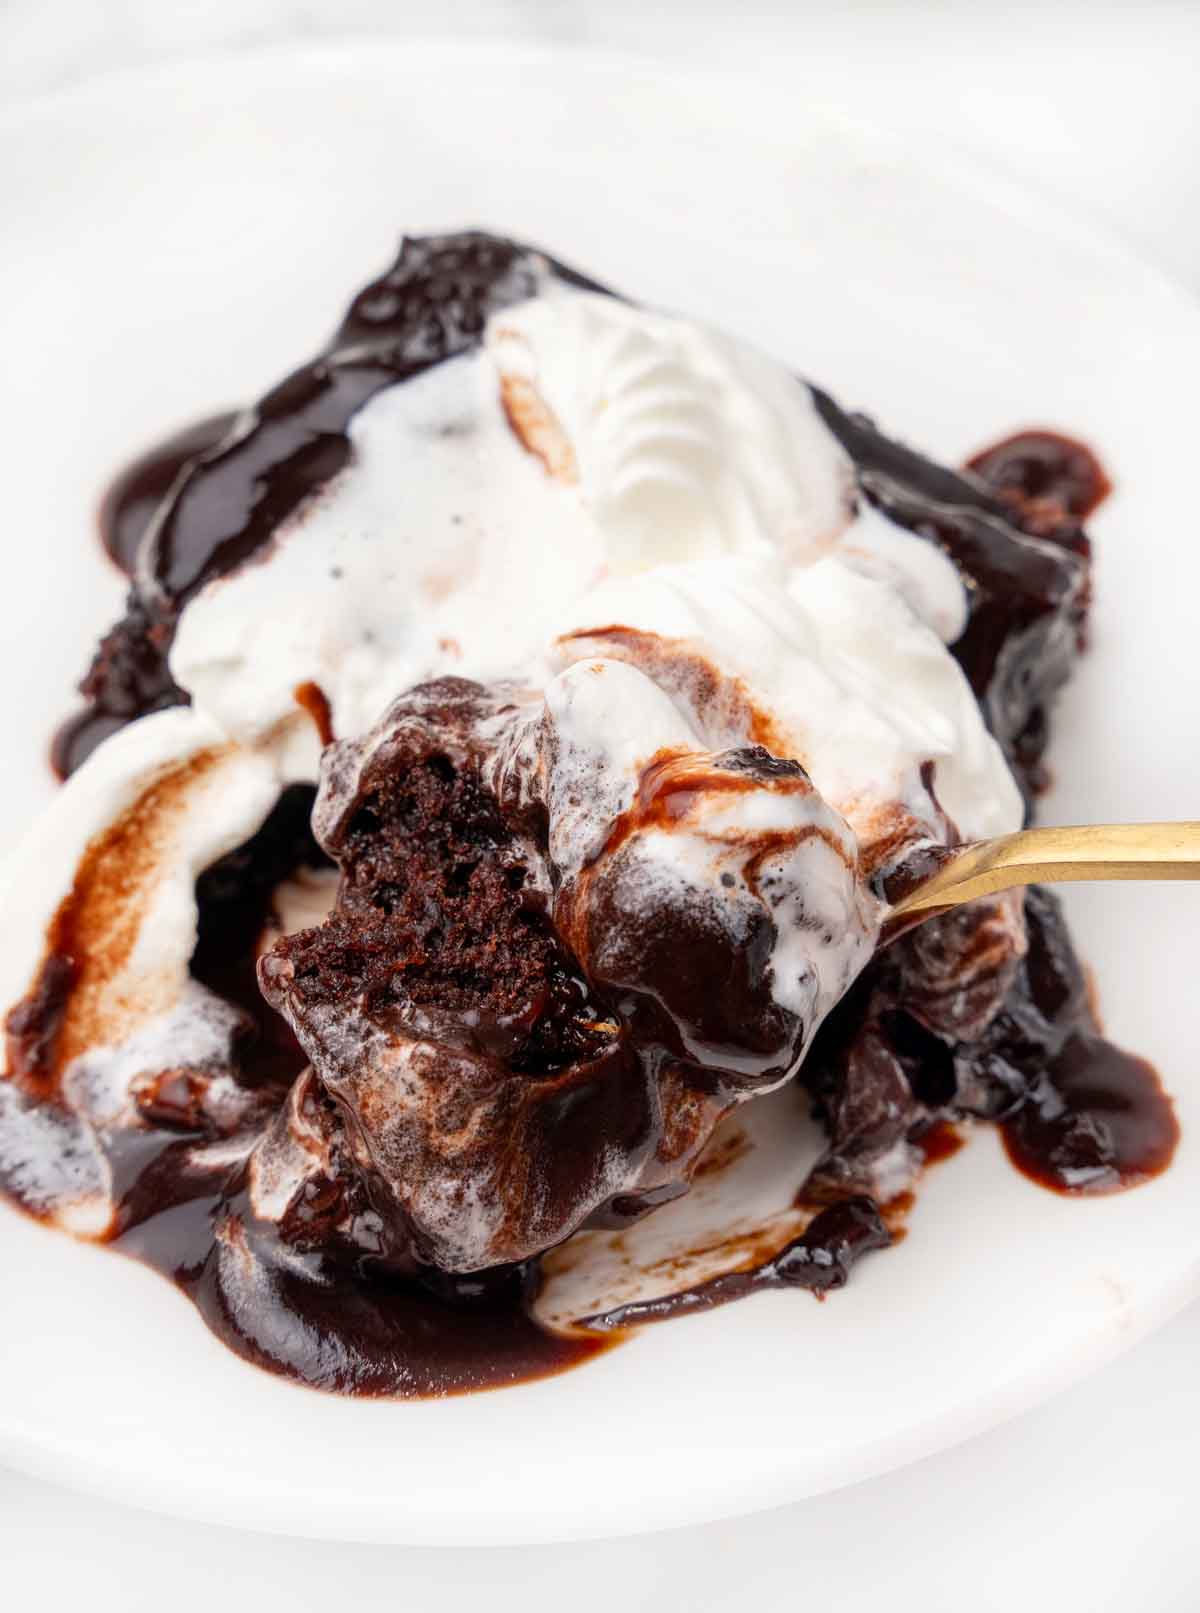 Chocolate pudding cake on a white plate with whipped cream and a spoon.